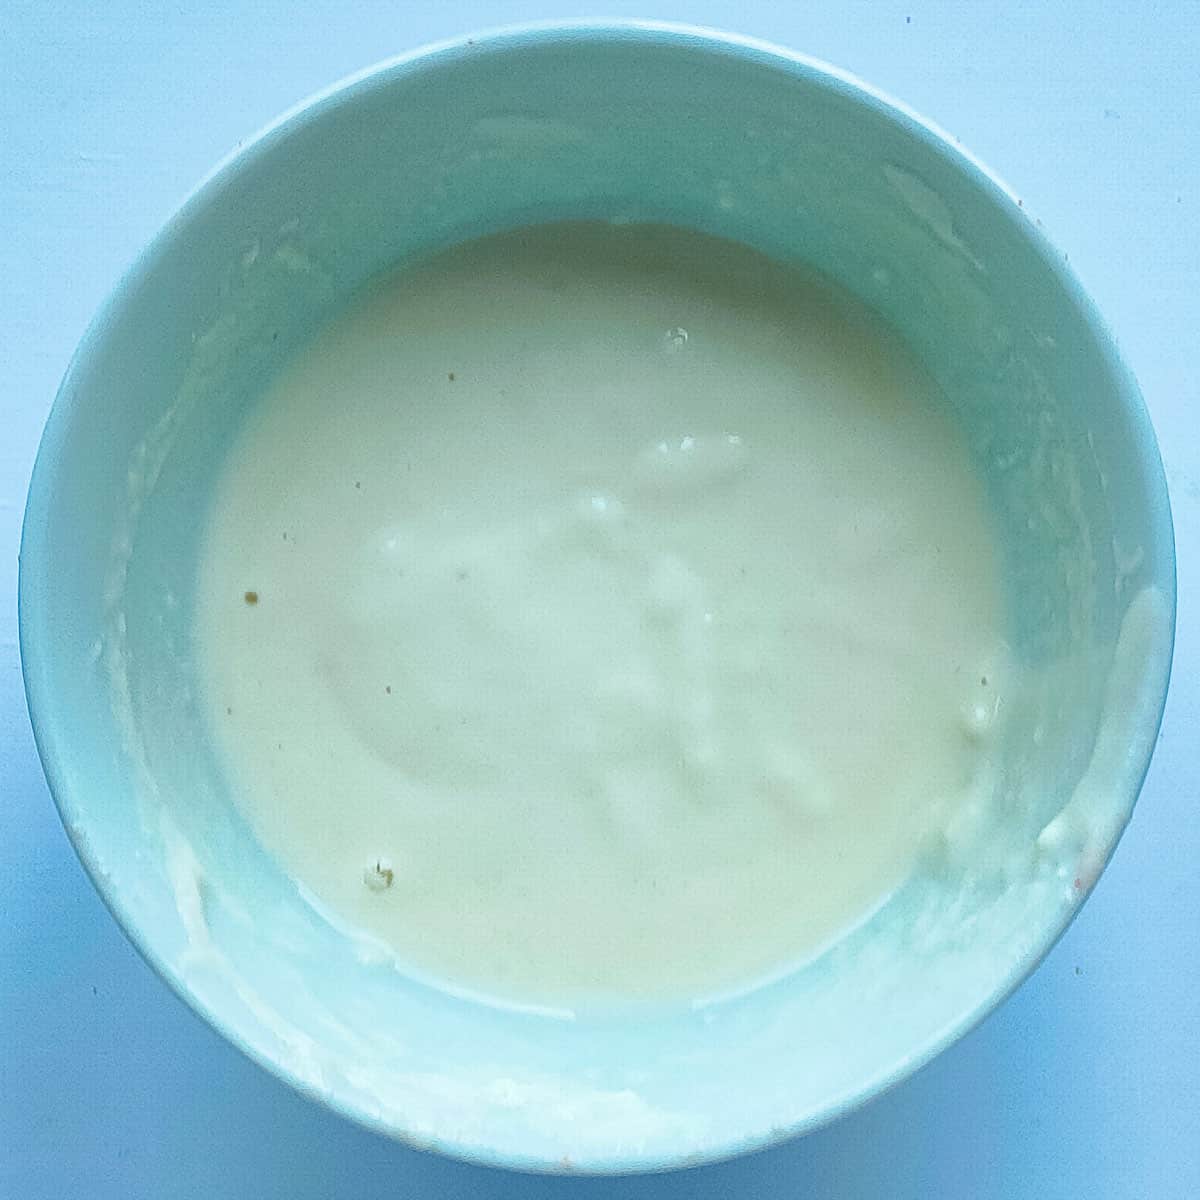 Flour-water mixture in a white bowl.